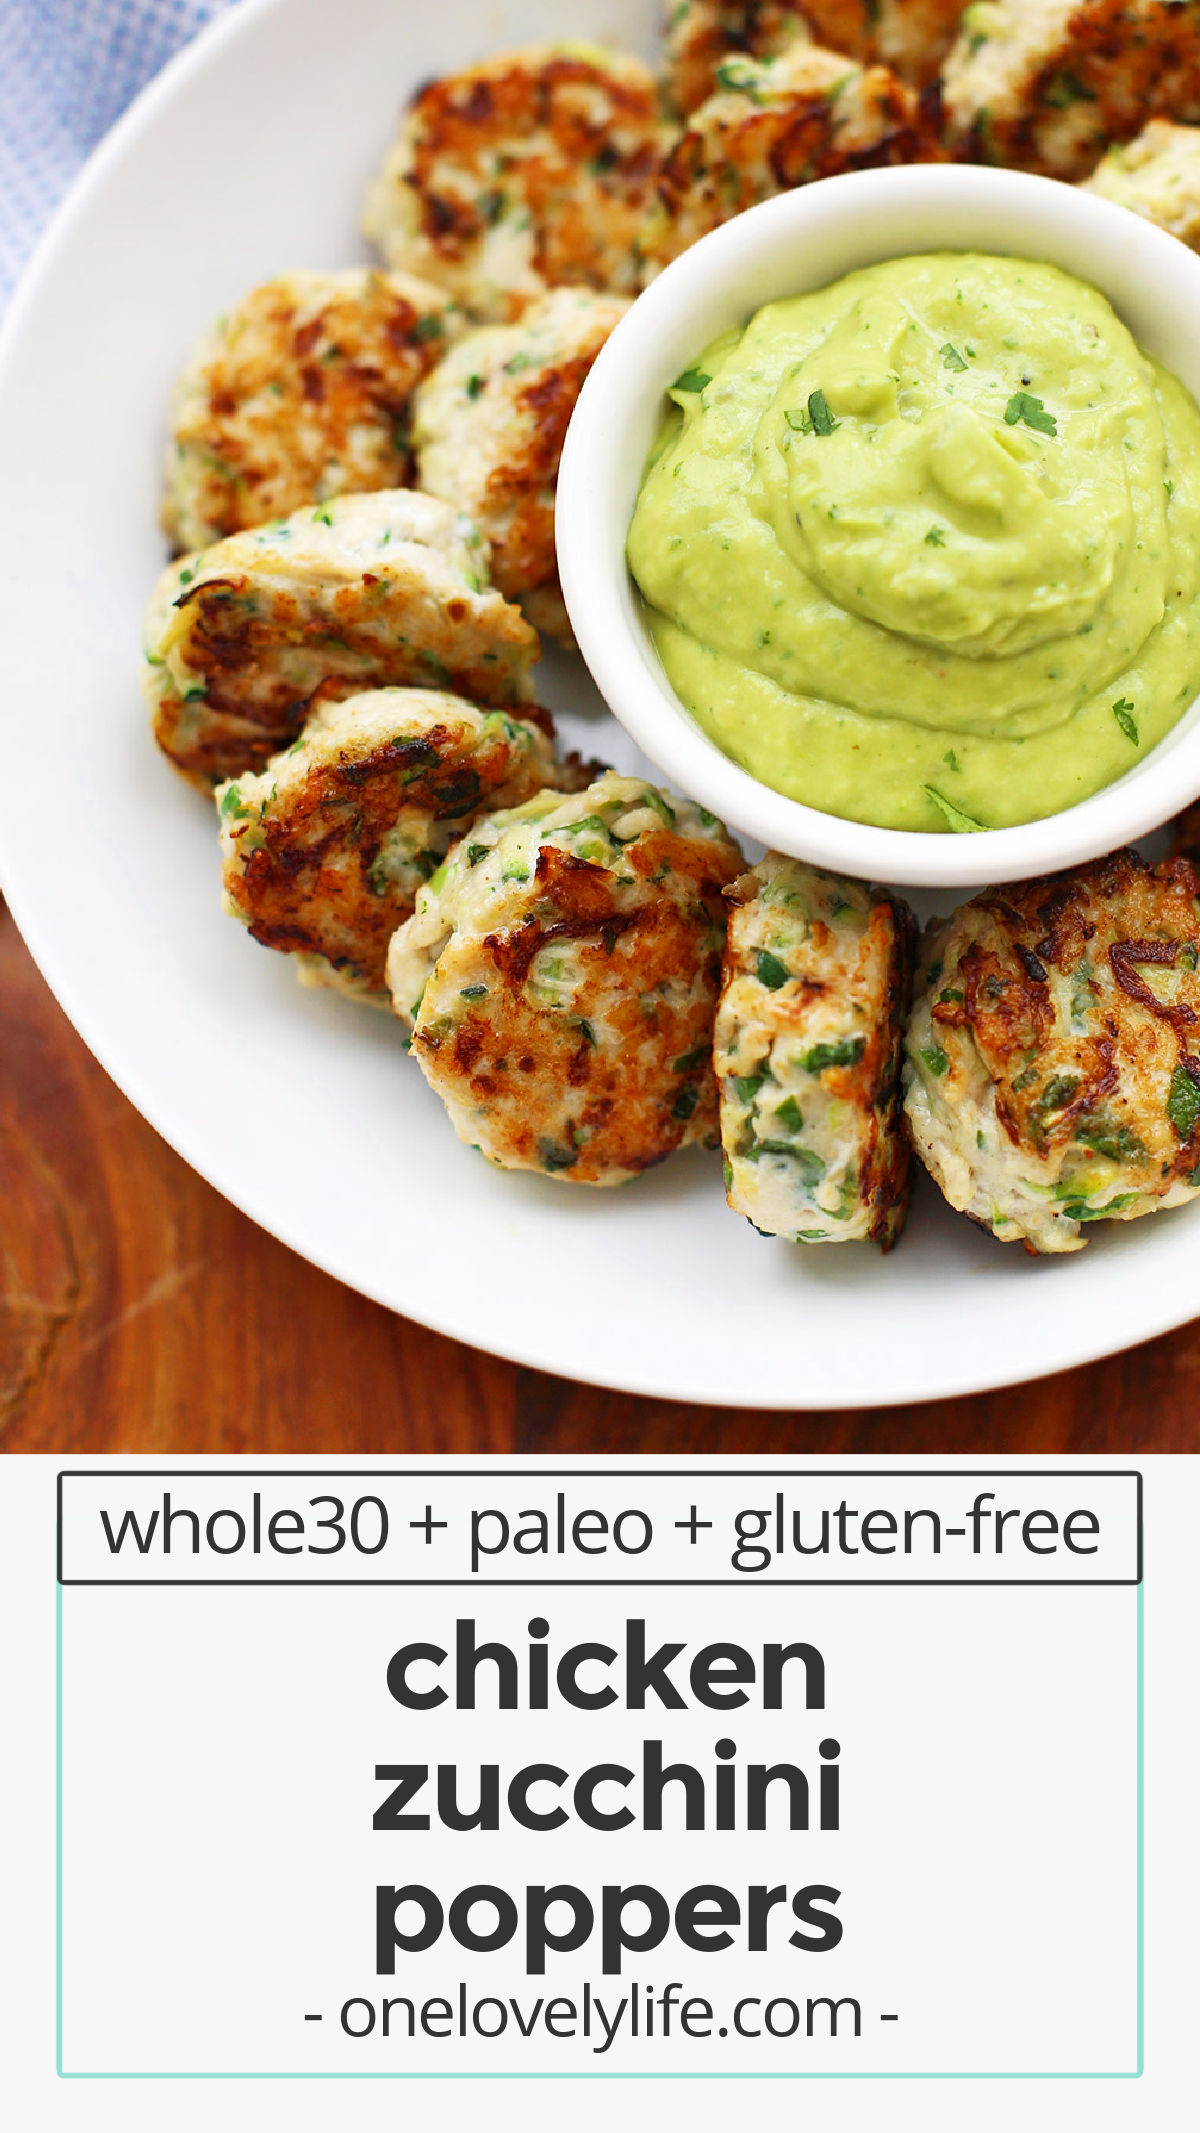 Paleo & Whole30 Chicken Zucchini Poppers - These chicken zucchini meatballs are so easy and delicious! Perfect for meal prep and clean eating! // keto meatballs // paleo meatballs // chicken meatballs // paleo appetizer // paleo meal prep// meal prep lunch // meal prep recipe // Whole30 dinner // keto dinner // low carb dinner // paleo chicken meatballs // whole30 meatballs // healthy dinner recipe